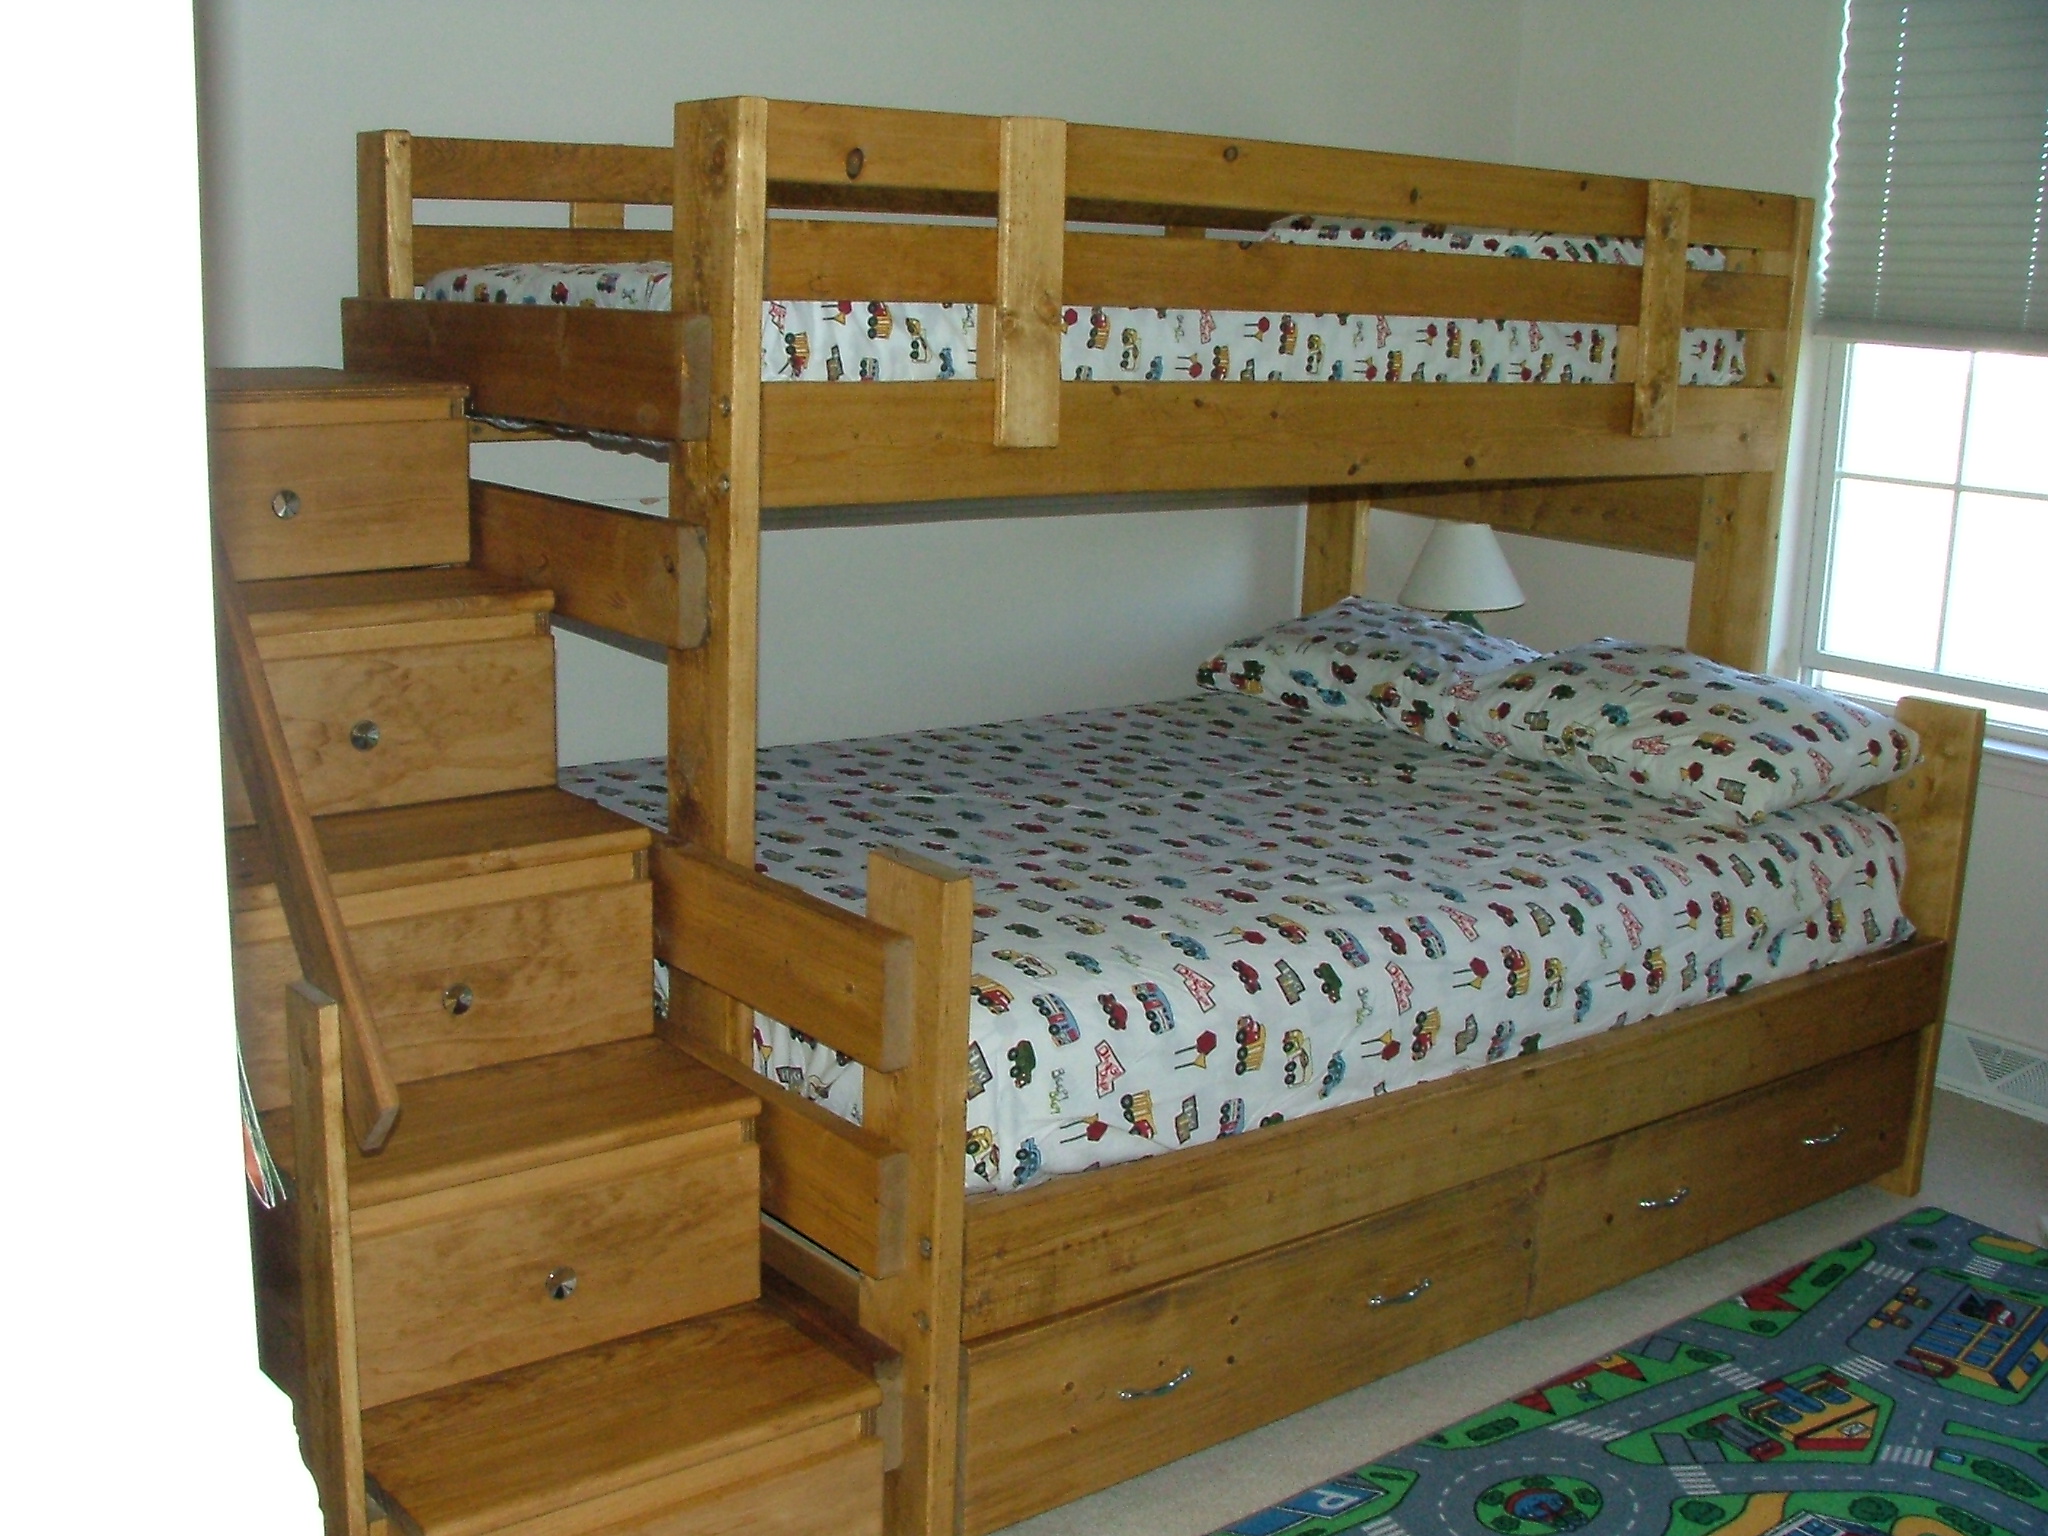 Full Bed Furniture Woodworking Plans, Free Bunk Bed With Stairs Building Plans